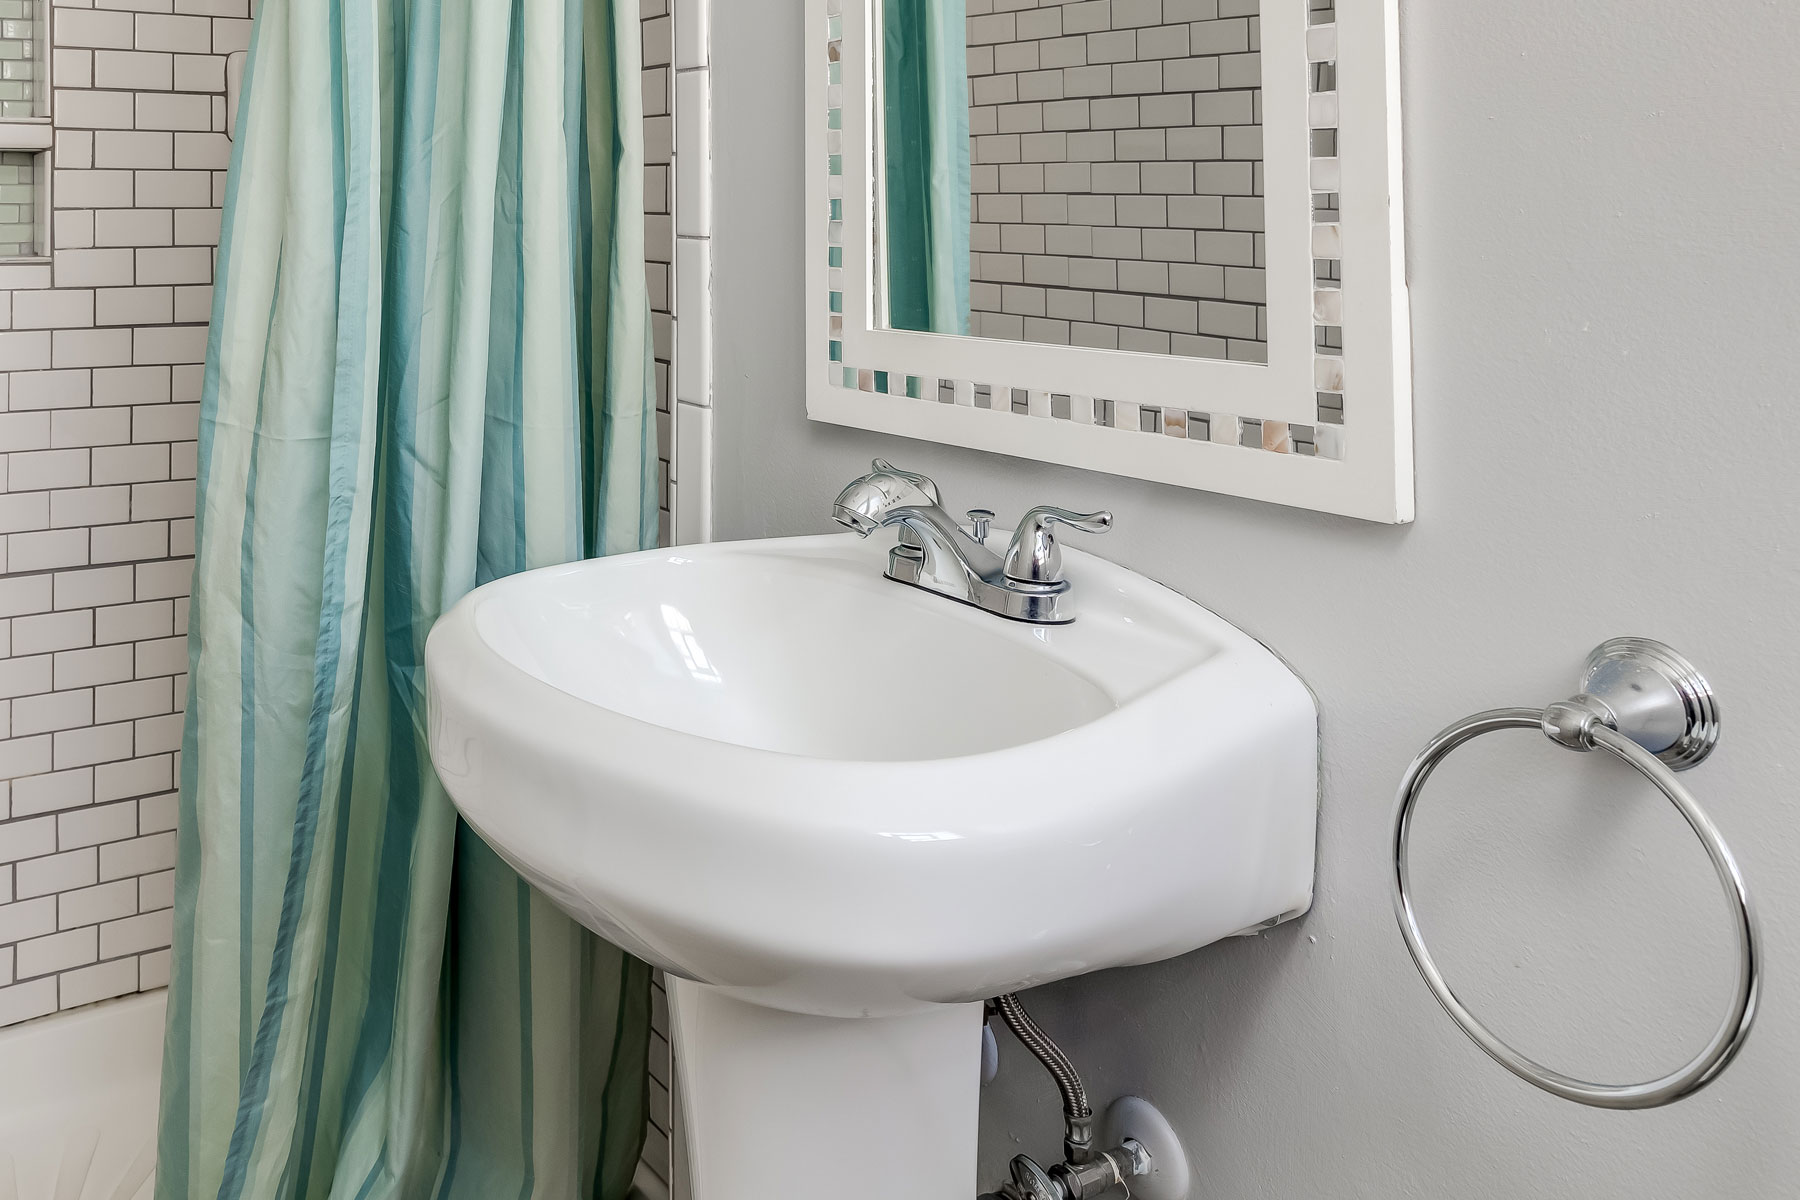 How To Remove A Pedestal Sink